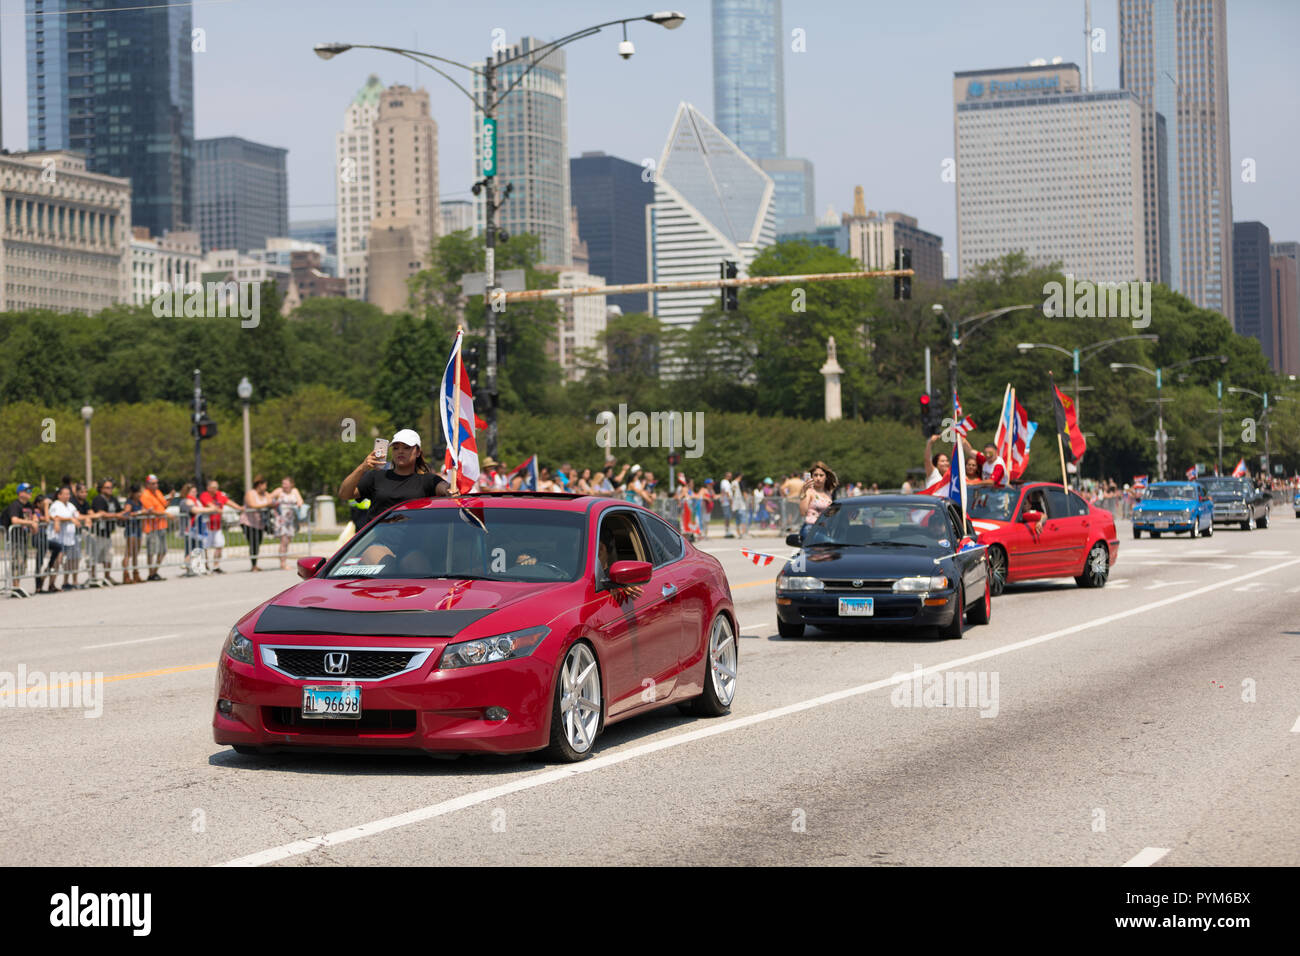 Chicago, Illinois, USA - June 16, 2018: The Puerto Rican Day Parade, Puerto Ricans driving a Honda Accord red  with puerto rican flags on them during  Stock Photo